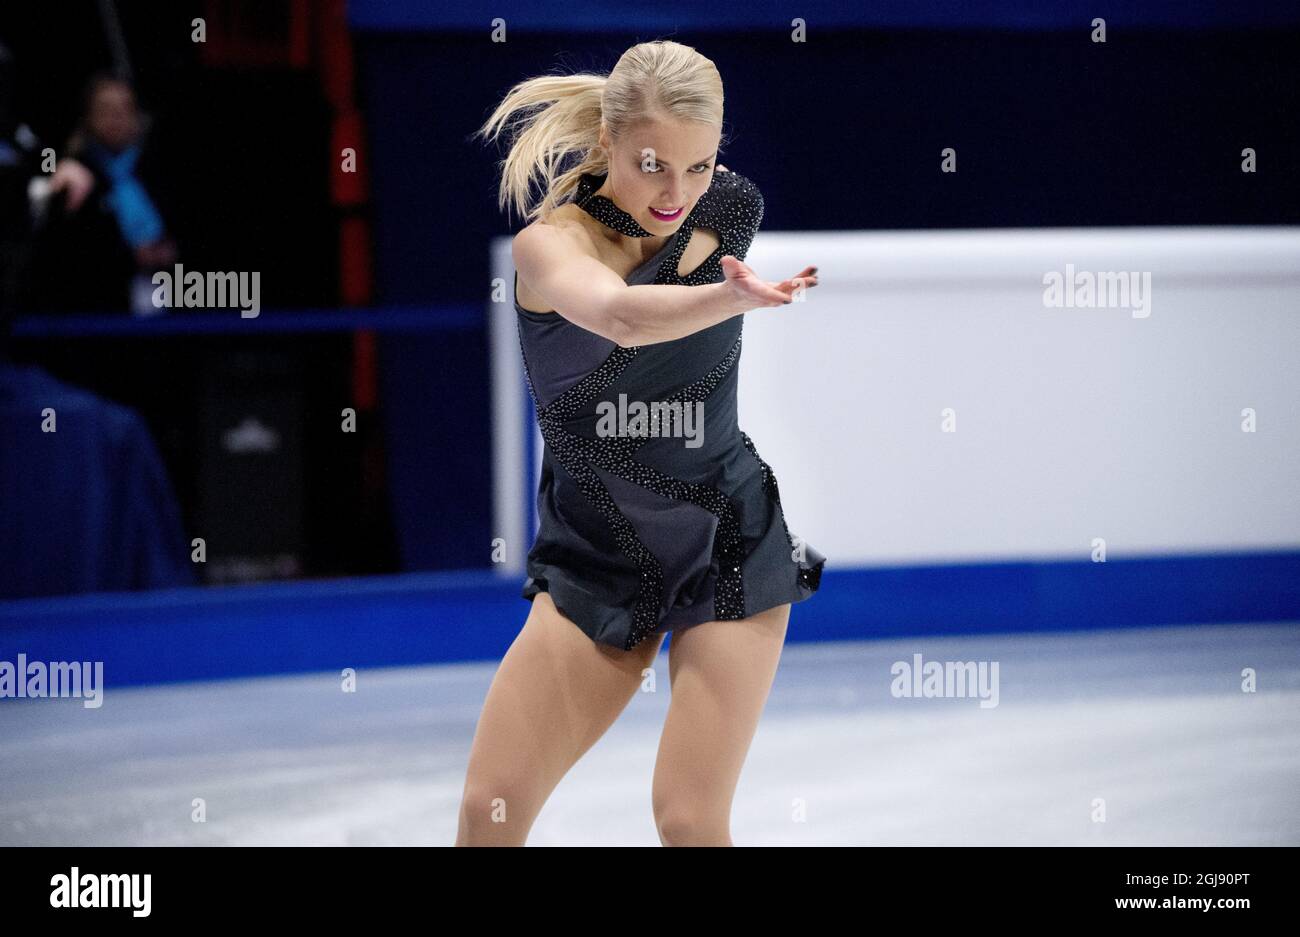 STOCKHOLM 20150129 Kiira Korpi of Finland is seen during the ladyÂ´s short program at the European Figure Skating Championships in Stockholm, Sweden, January 29, 2014. Foto: Jessica Gow / TT / Kod 10070 Stock Photo